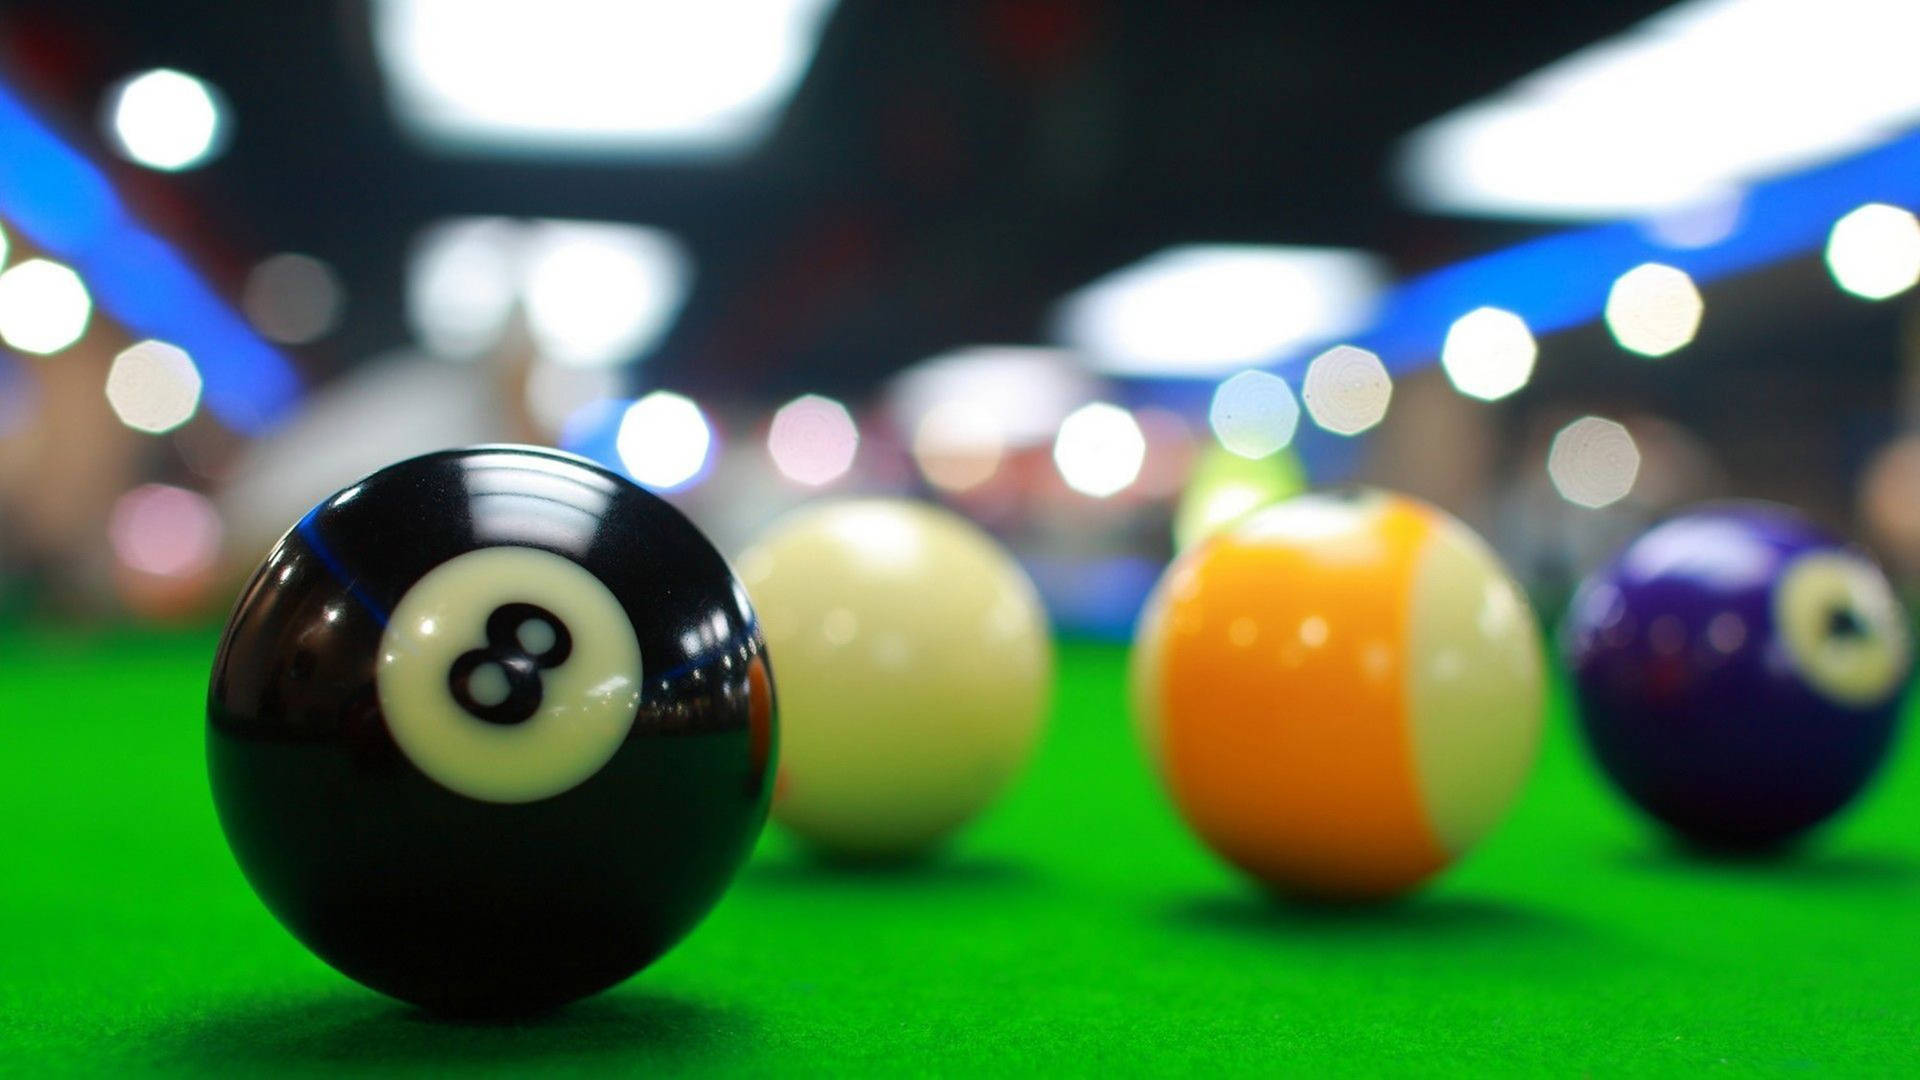 Caption: Competitive Snooker Play - Detailed Shot of Balls Positioned on Green Table Wallpaper